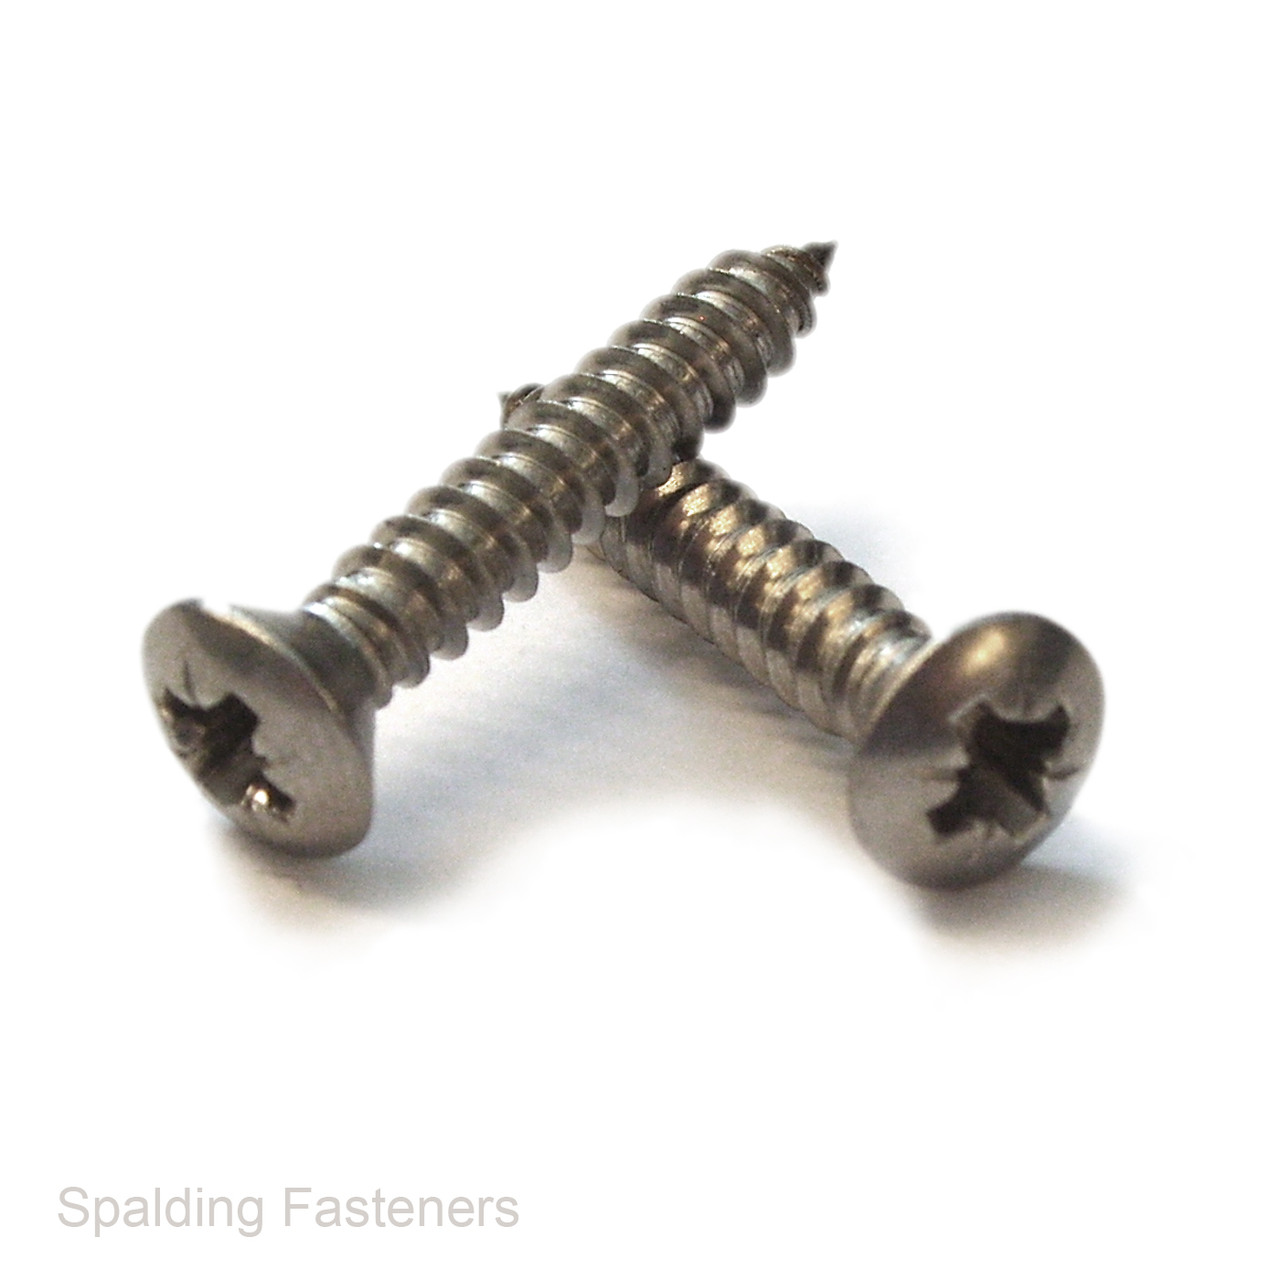 No.10 A2 Grade Stainless Steel Raised Countersunk Pozi Head Self Tapping Screws